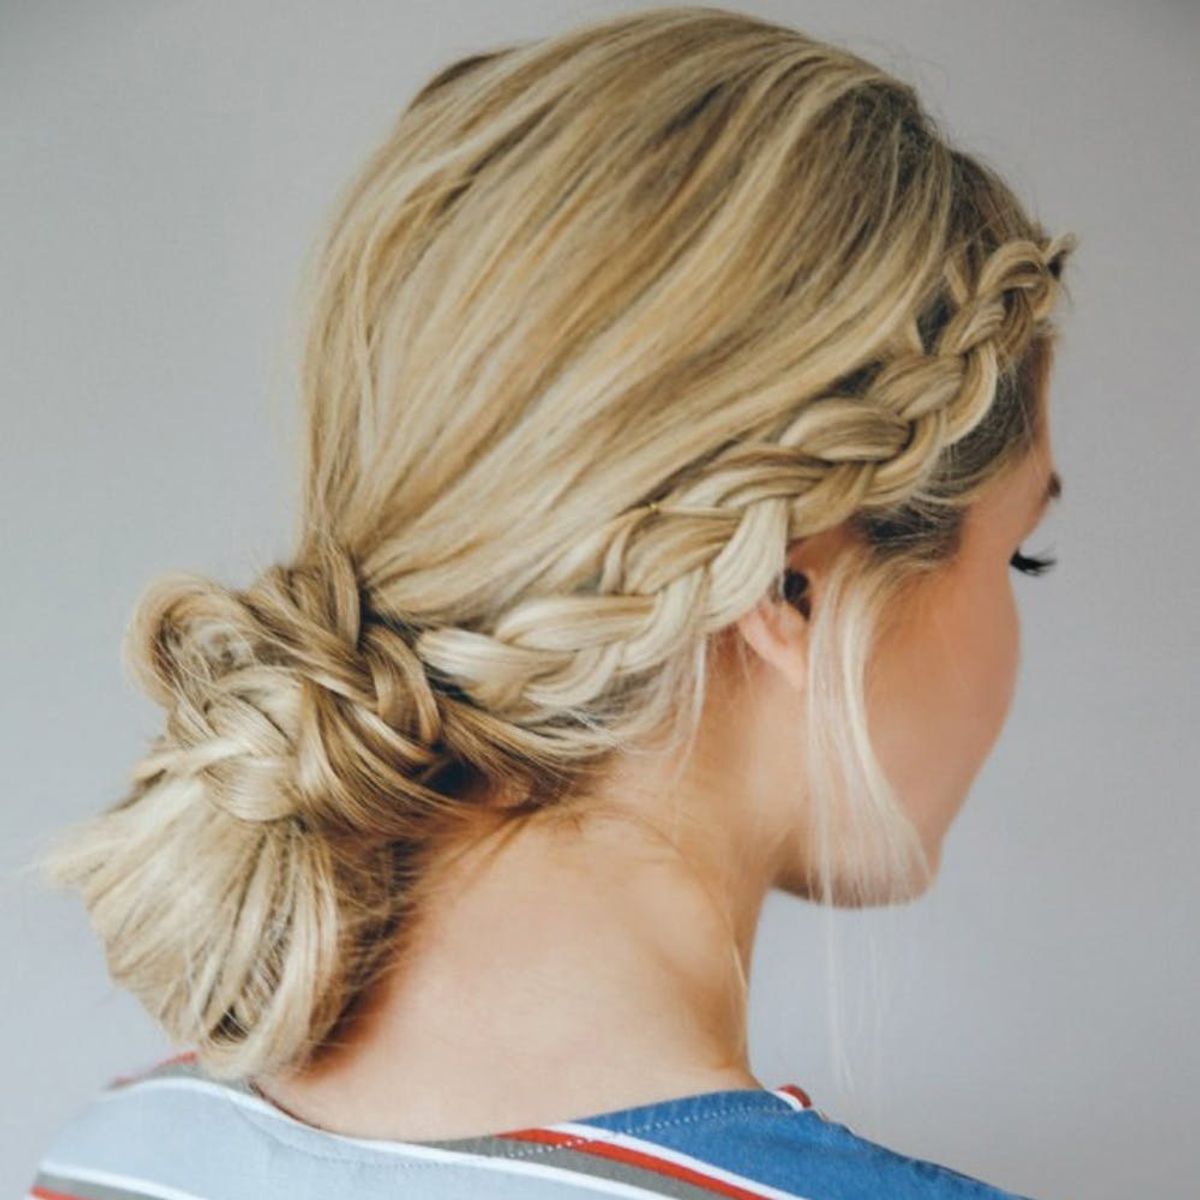 10 Braided Buns You Seriously Have to Try